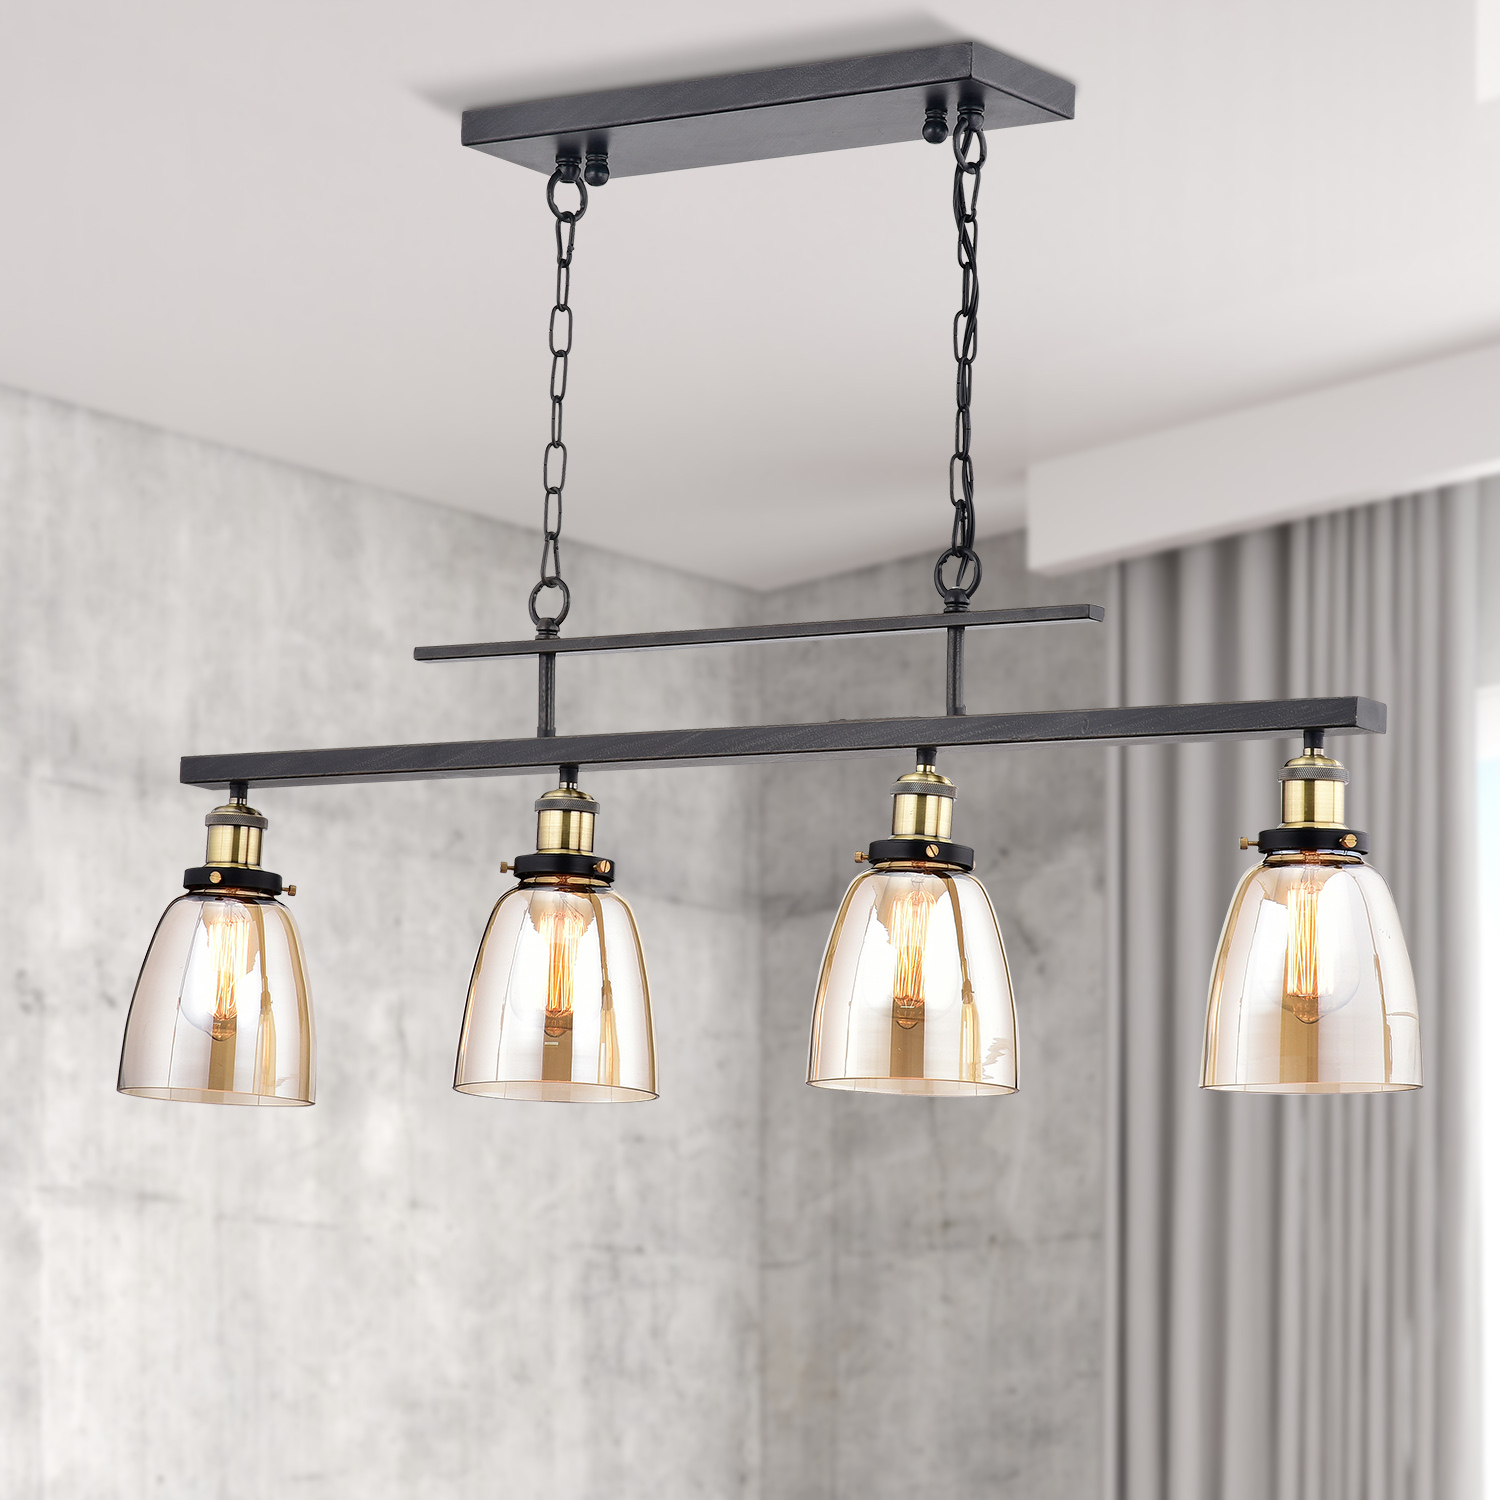 4-Light Antique Black Downlight Linear Kitchen Chandelier with Amber ...